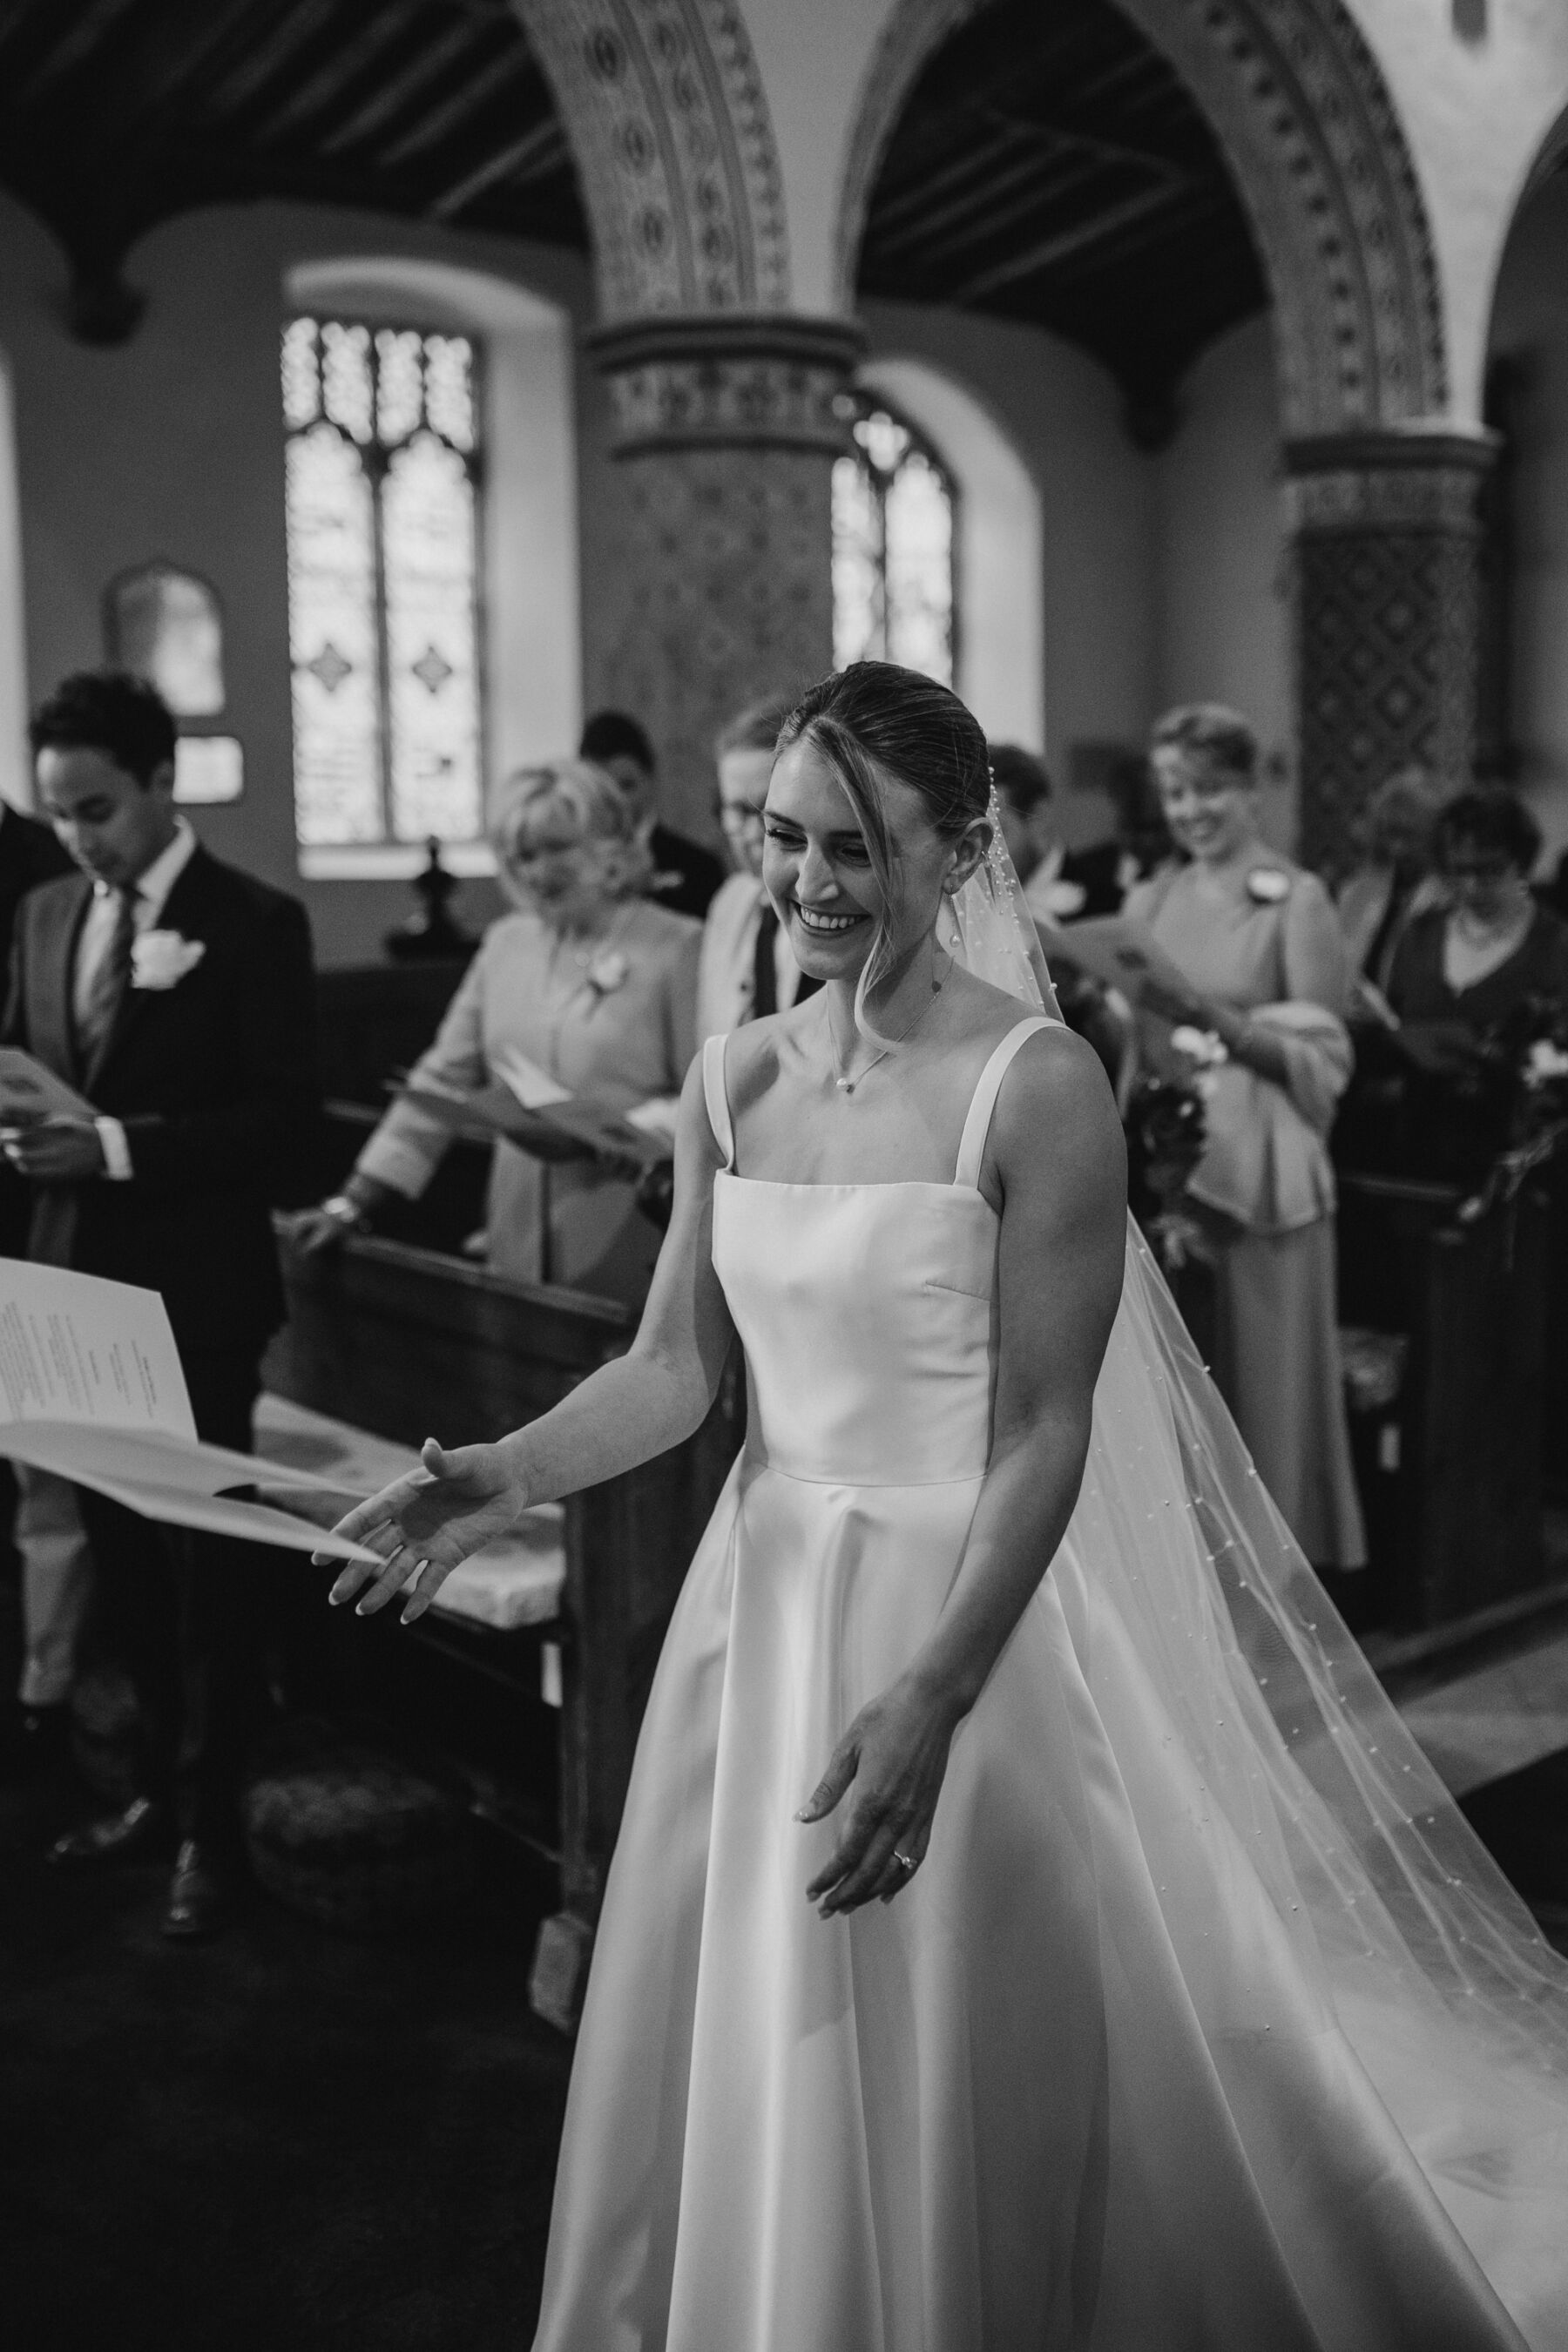 Bride smiling in church during the wedding ceremony. Bride wears a long polka dot veil and square neck dress by Khya.